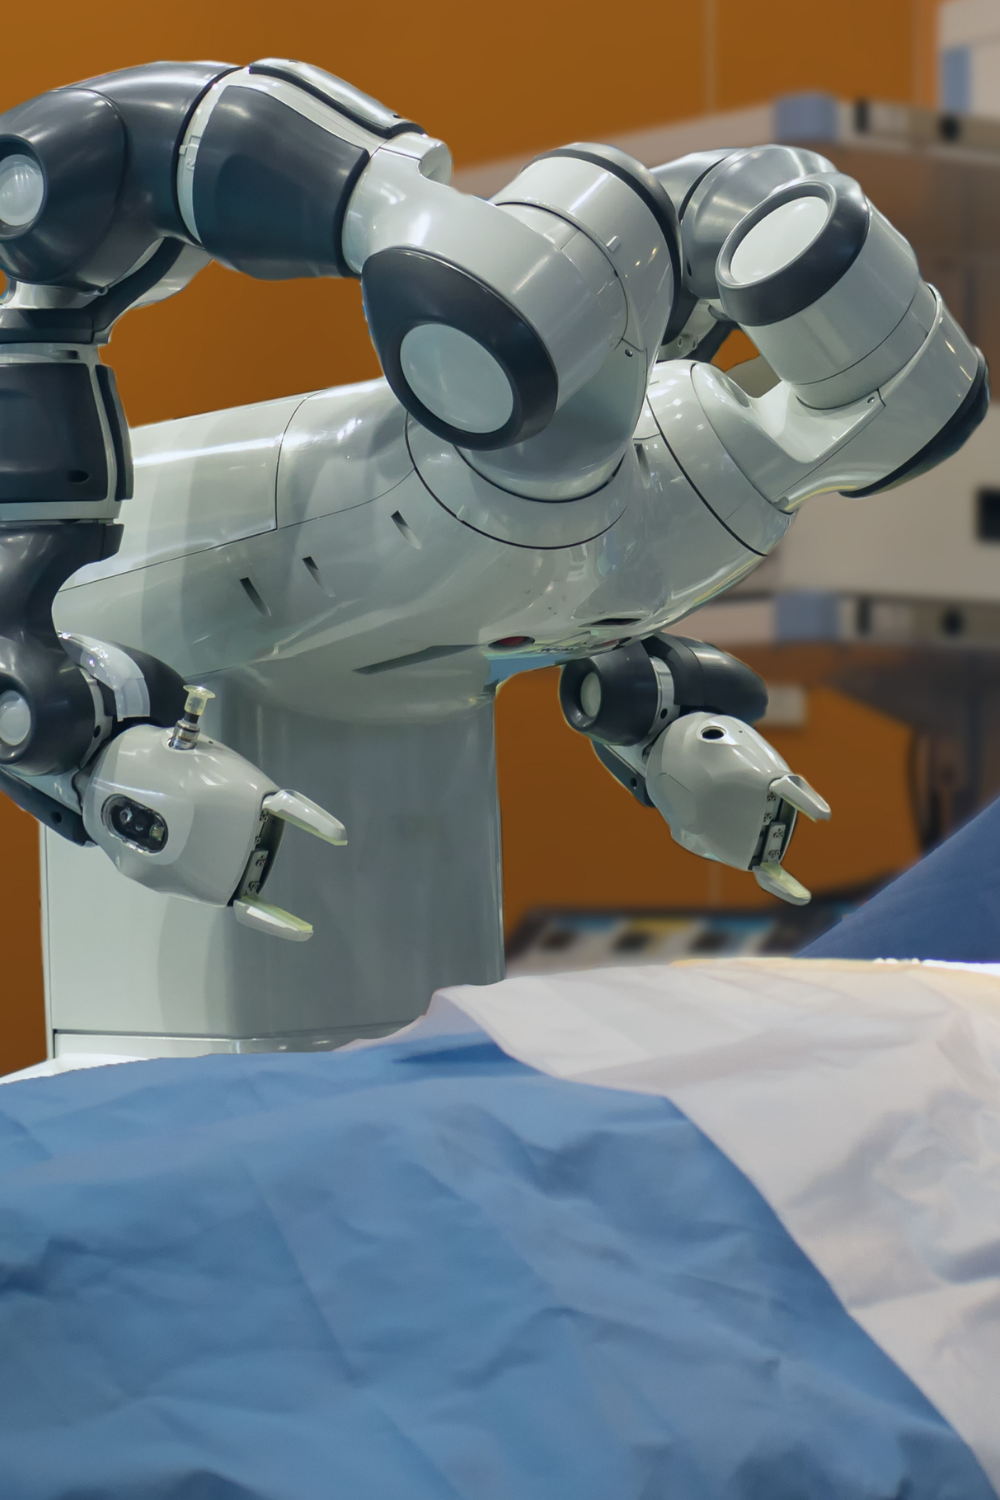 Robotic Surgery: Improved Surgical Method in the Modern World